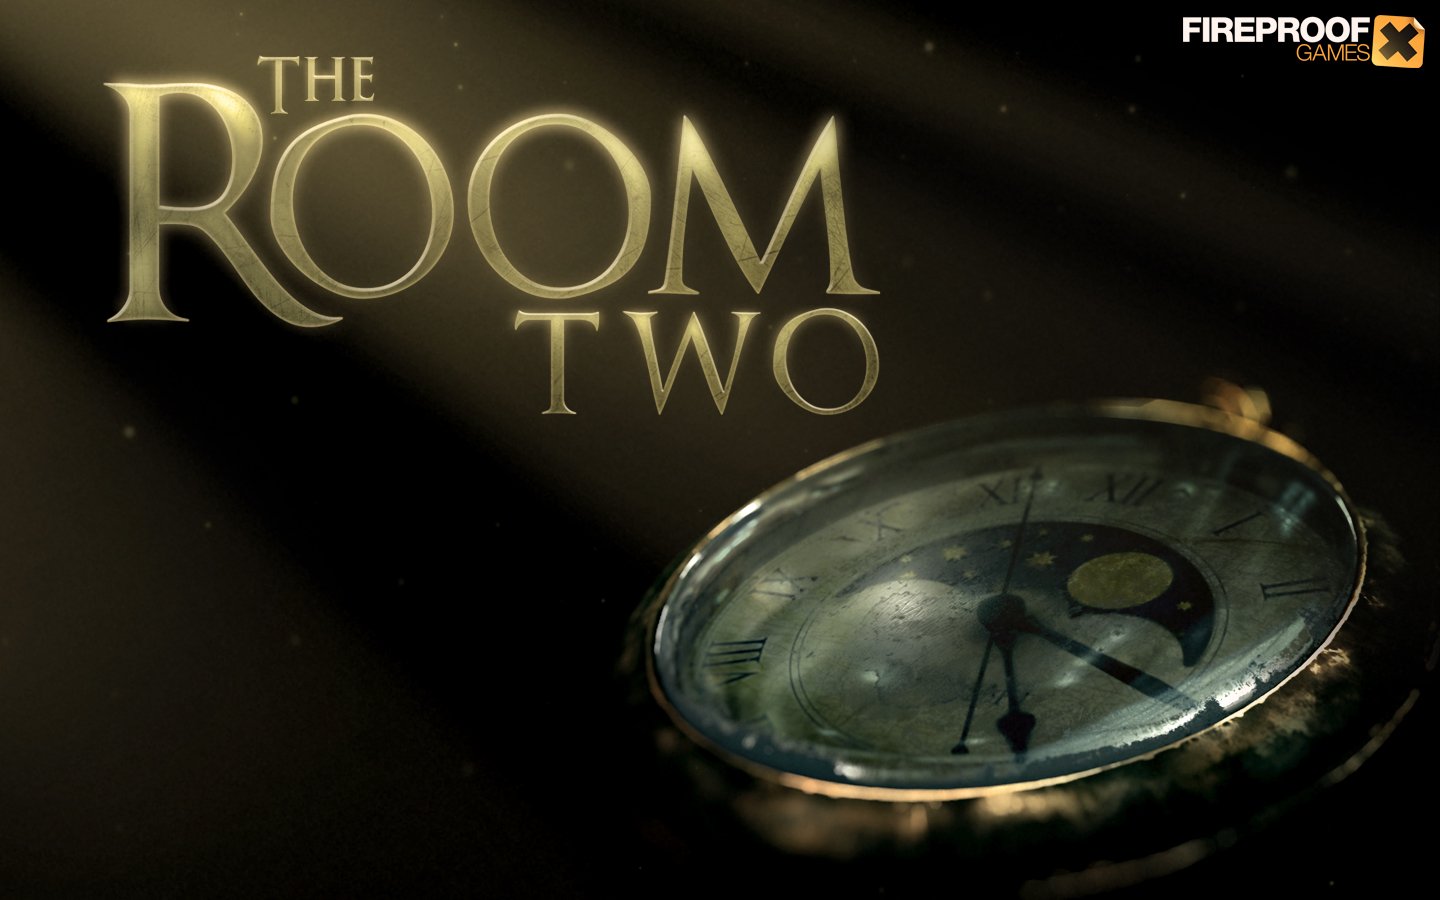 The Room kostenlos, The Room 2 Download im App Store 5